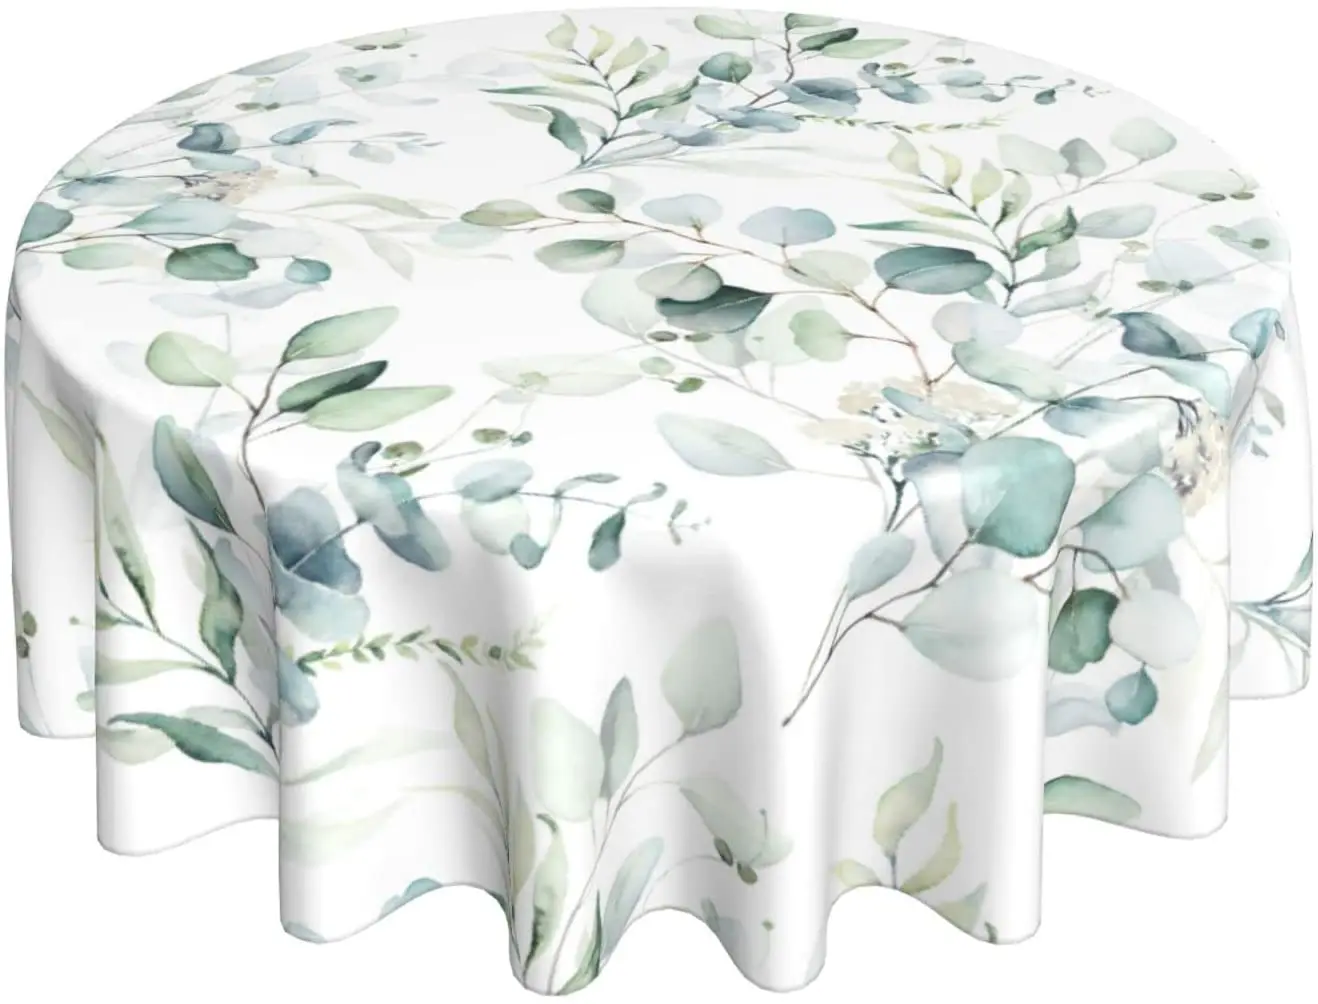 Spring Leaf Floral Sage Tablecloth Round 60 Inch Ruitic Watercolor Table Cloth Waterproof Fabric Green Grey Leaves Tablecloths